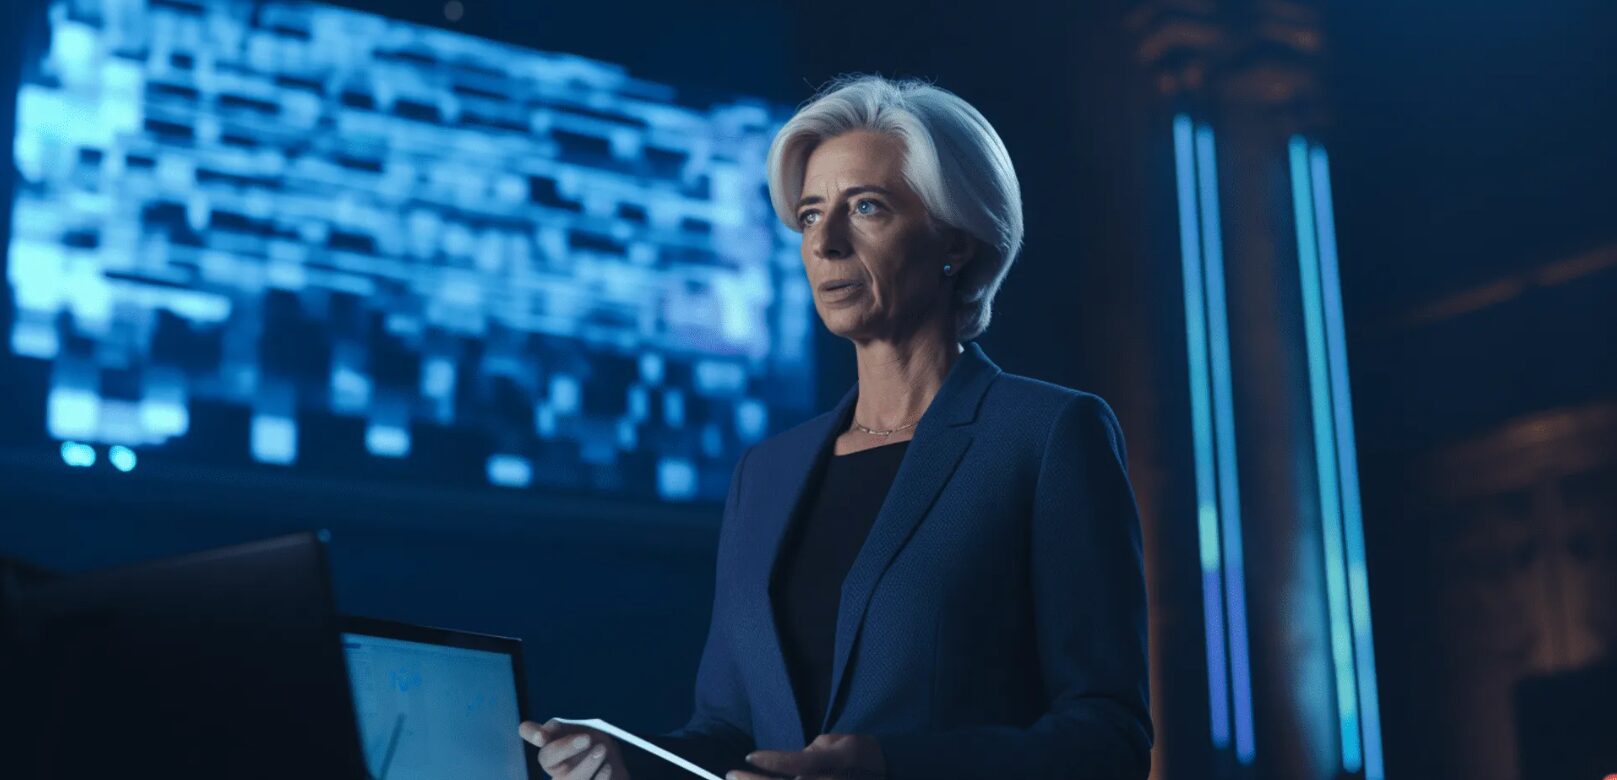 ECB President Lagarde discusses introduction of digital euro before end of her term in 2027